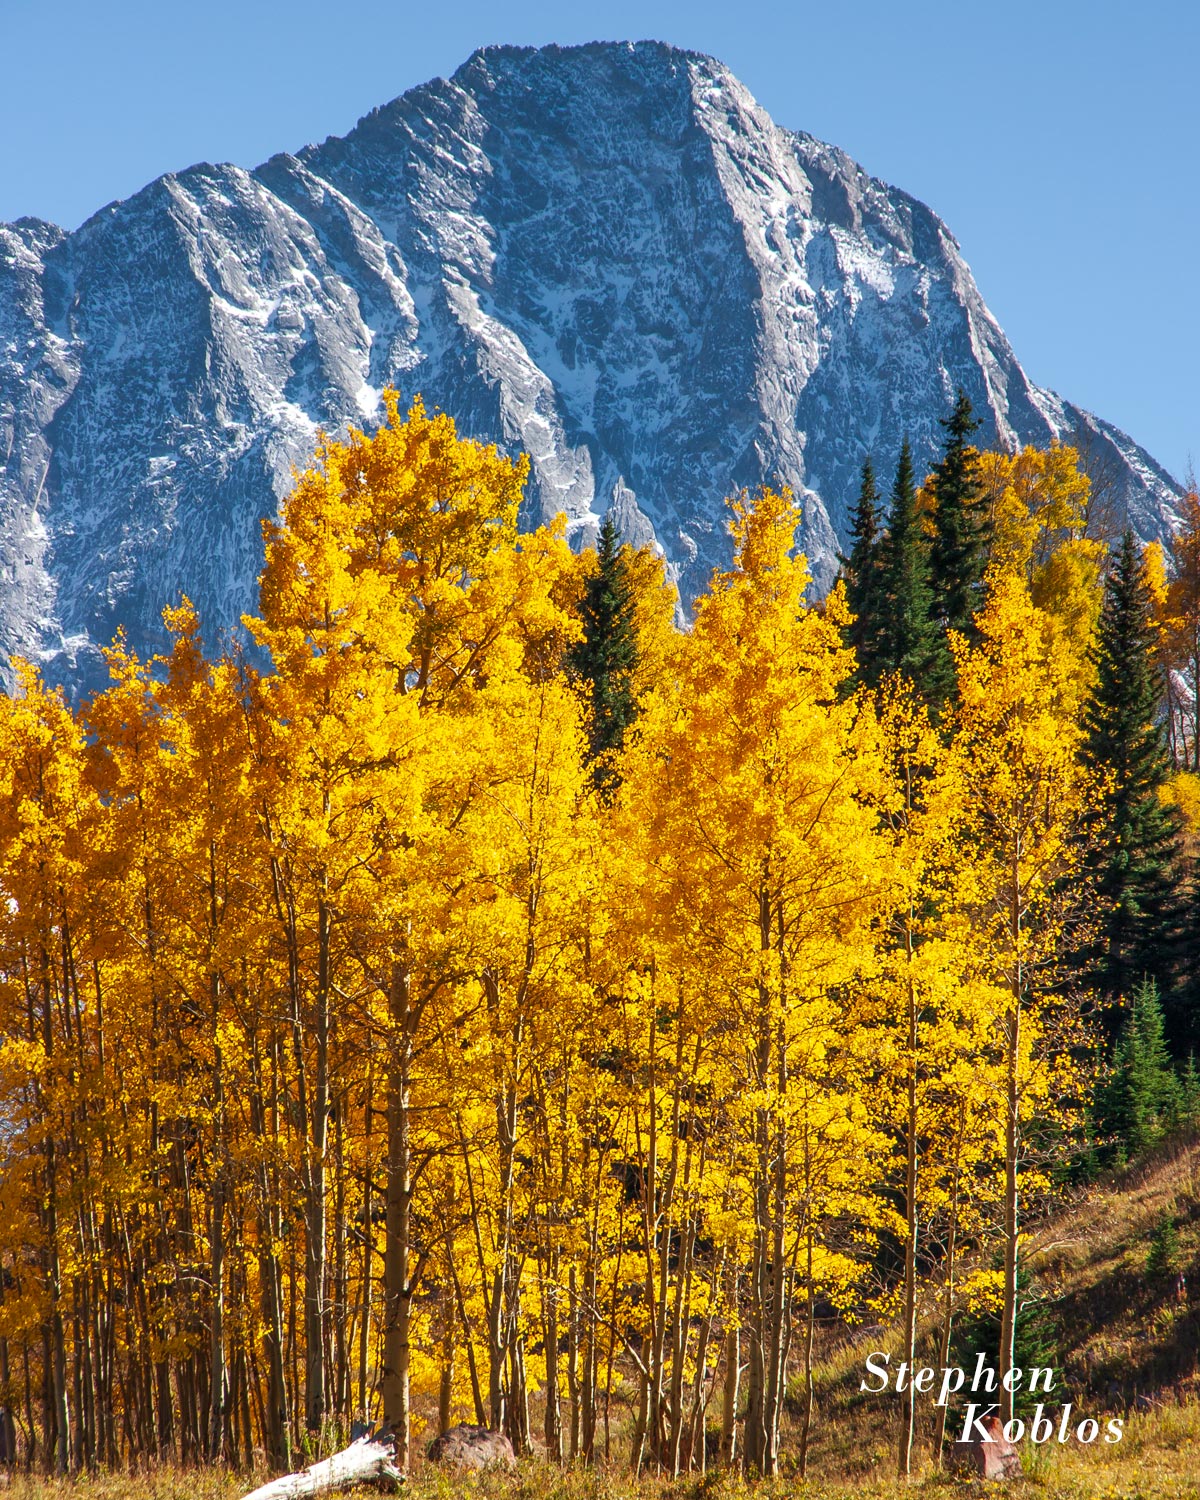 Capital Peak in the fall. I climbed this peak on September 15th 2010. I was lucky enough to have this peak all to myself that...